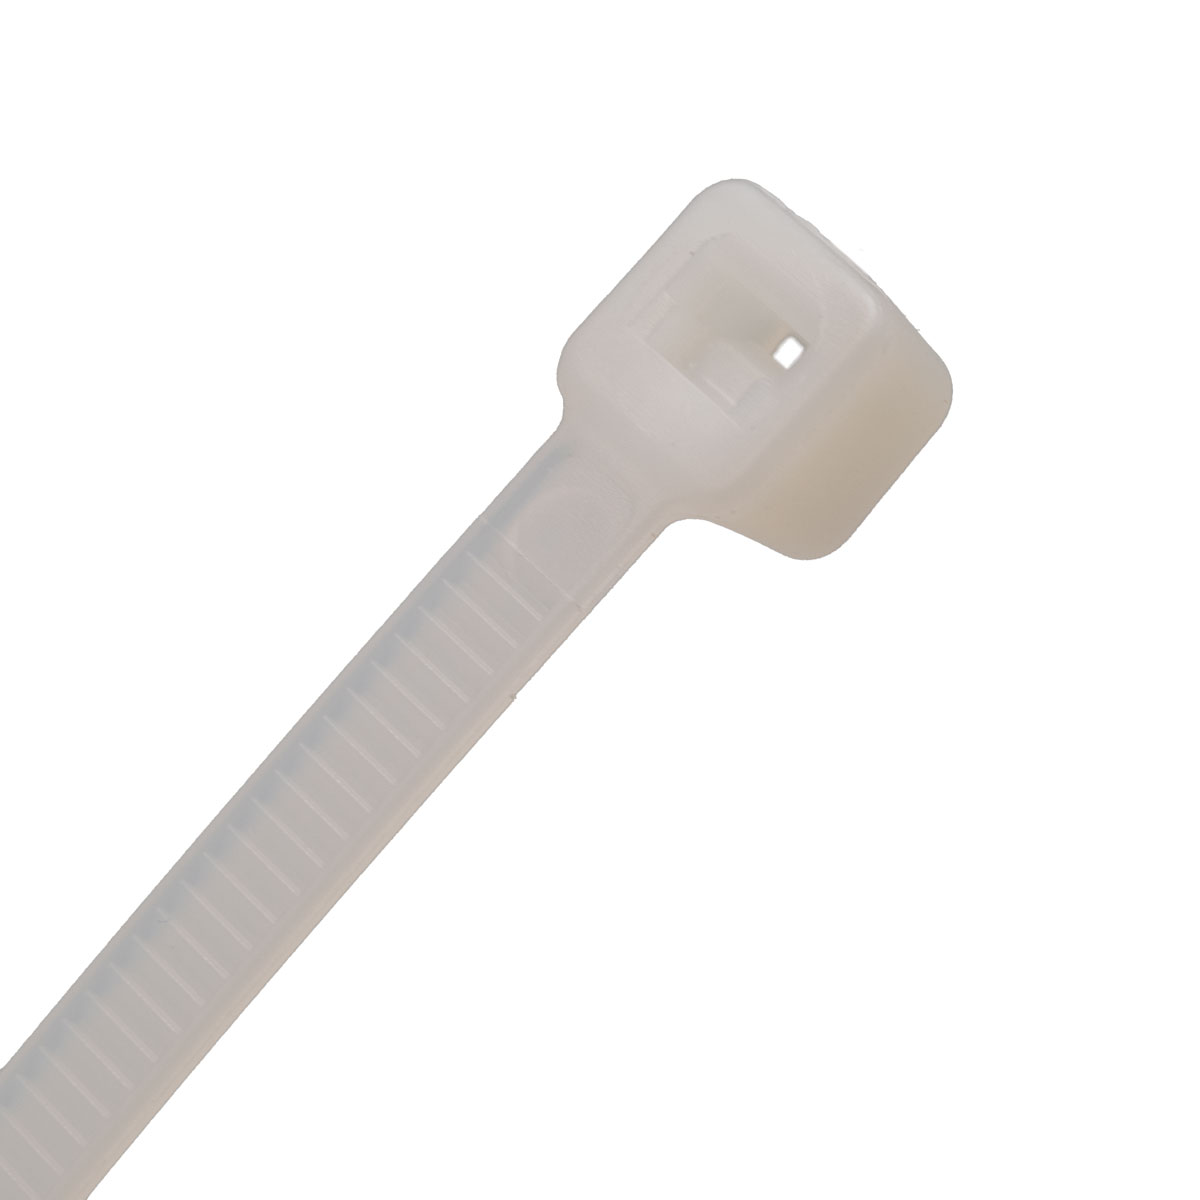 2.5x200mm Natural, Nylon 66 cable tie